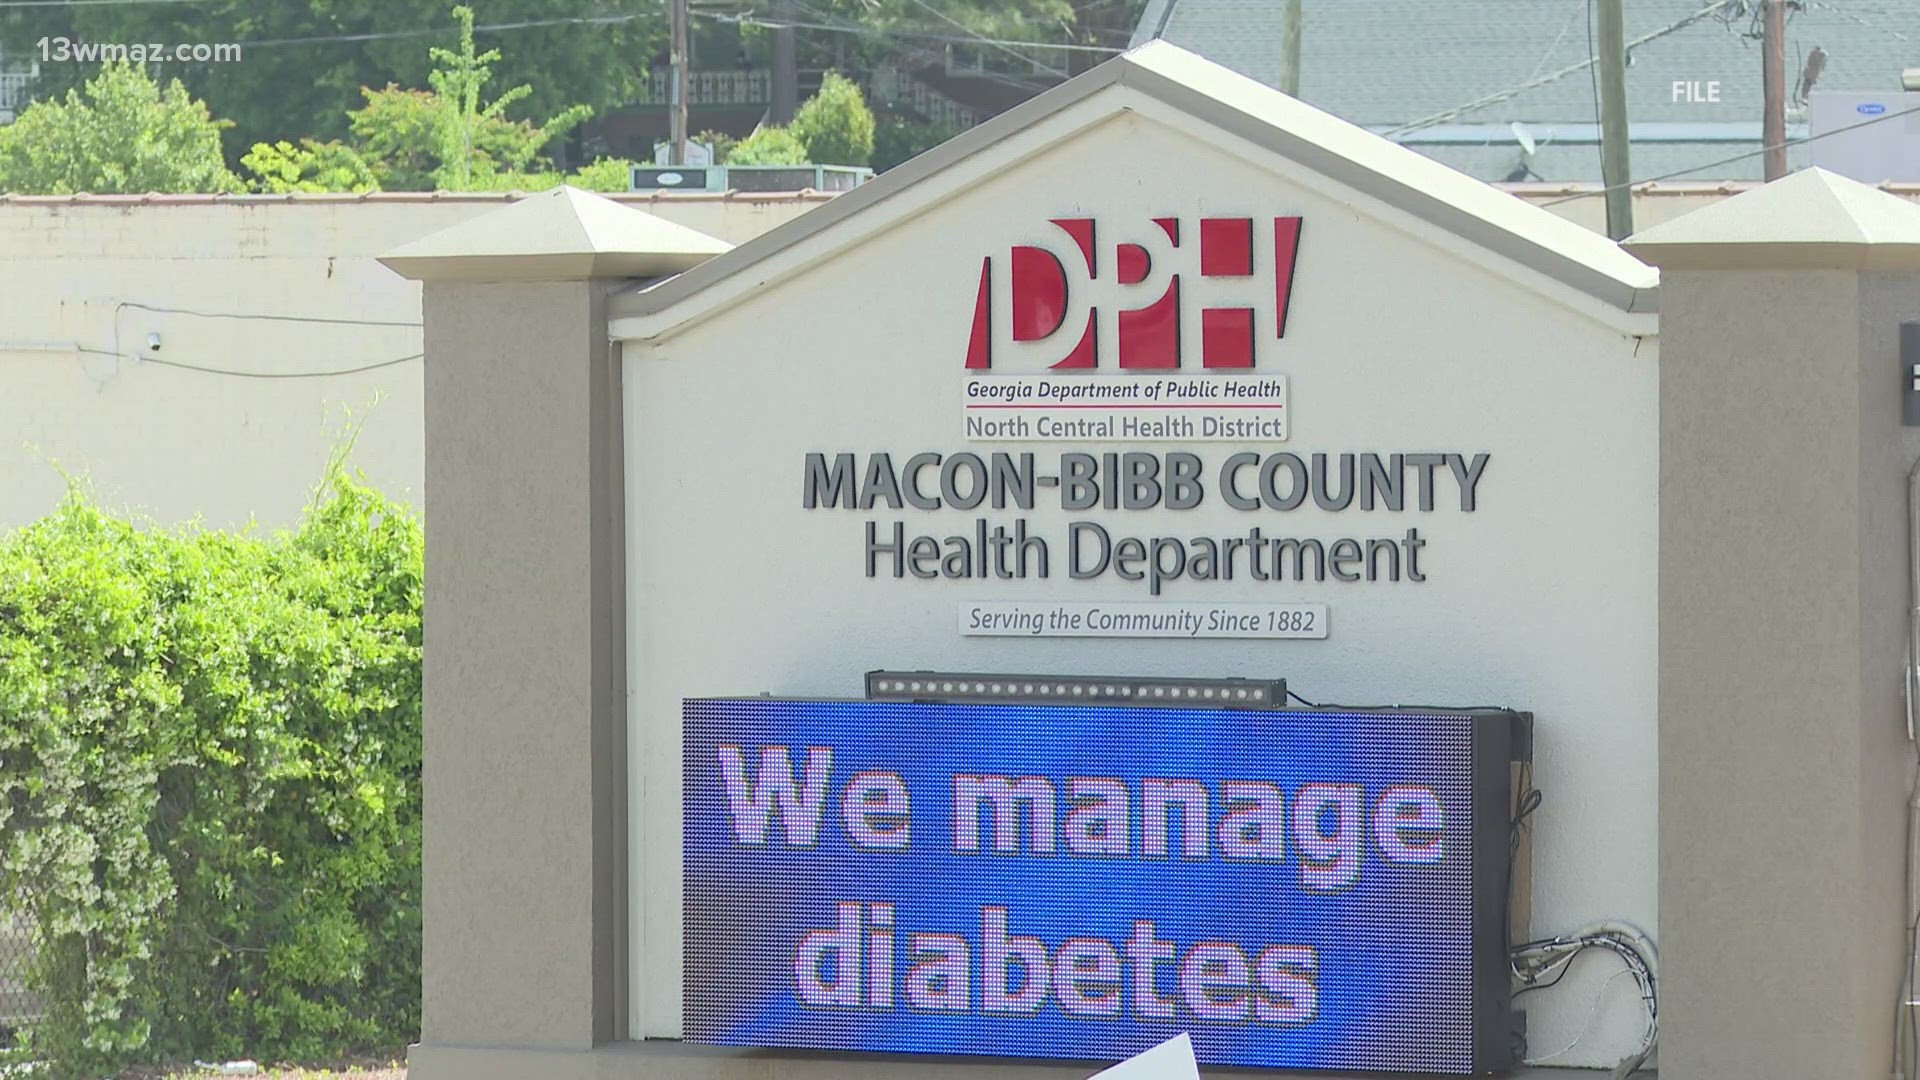 Applications for their second annual Diabetes Prevention Program are now open.